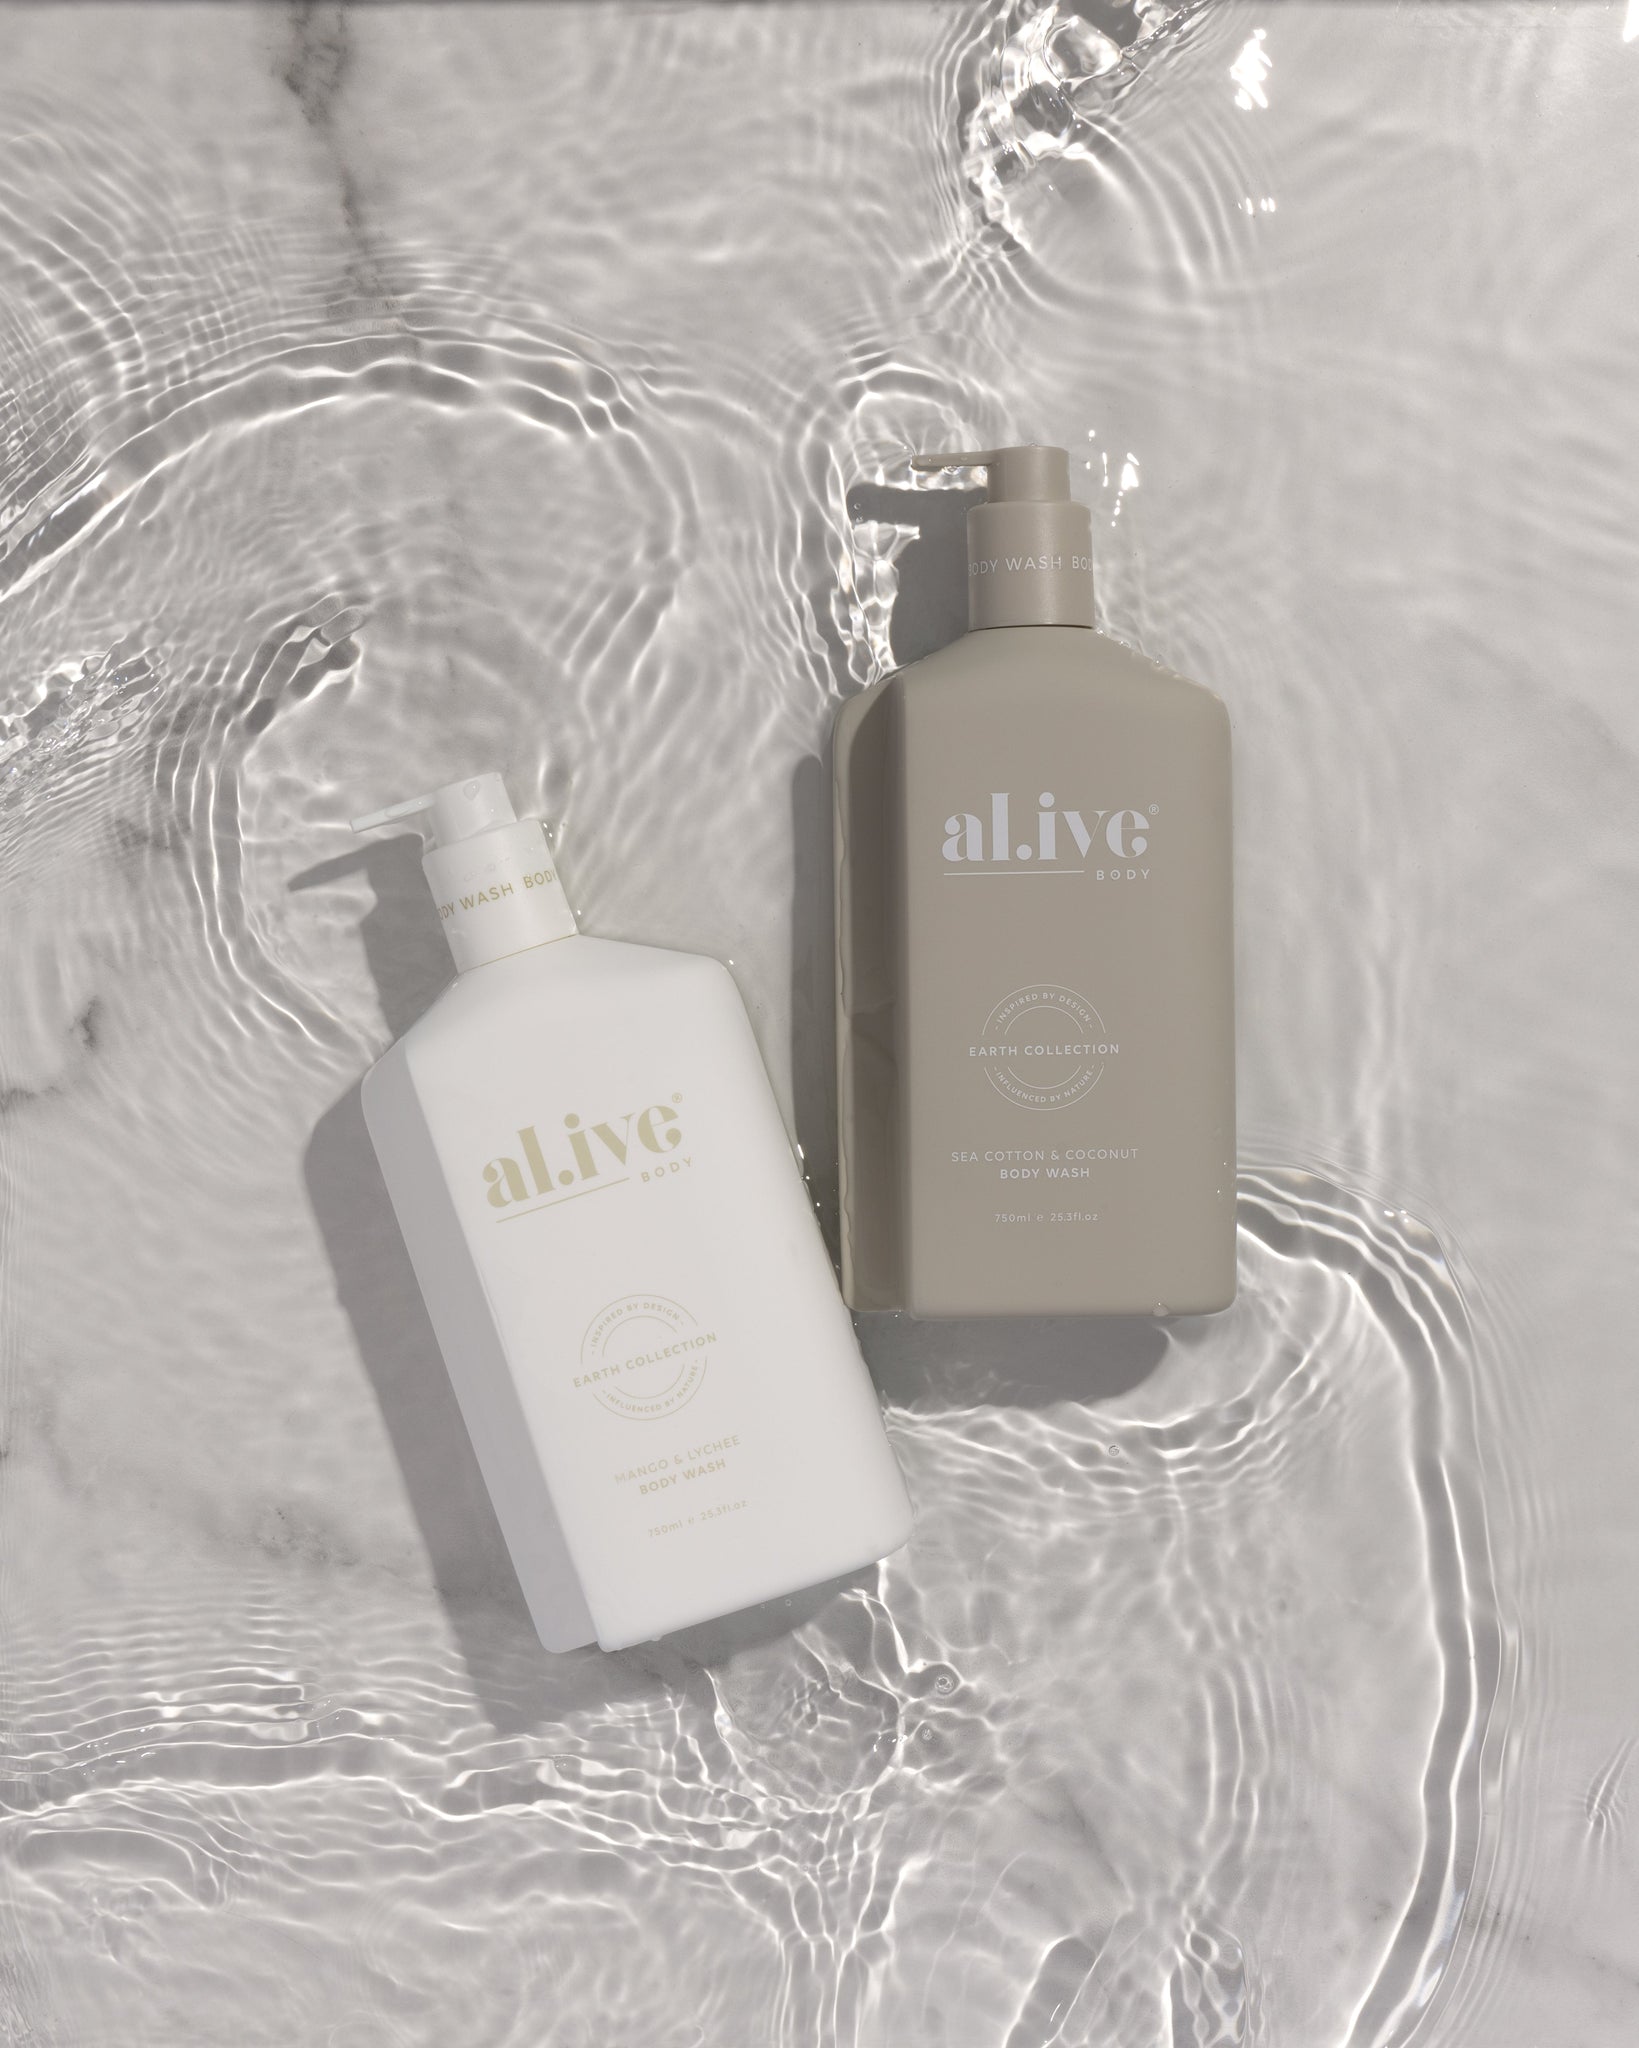 Introducing Our New 750ml Body Wash – Luxury and Sustainability in Every Drop - al.ive body